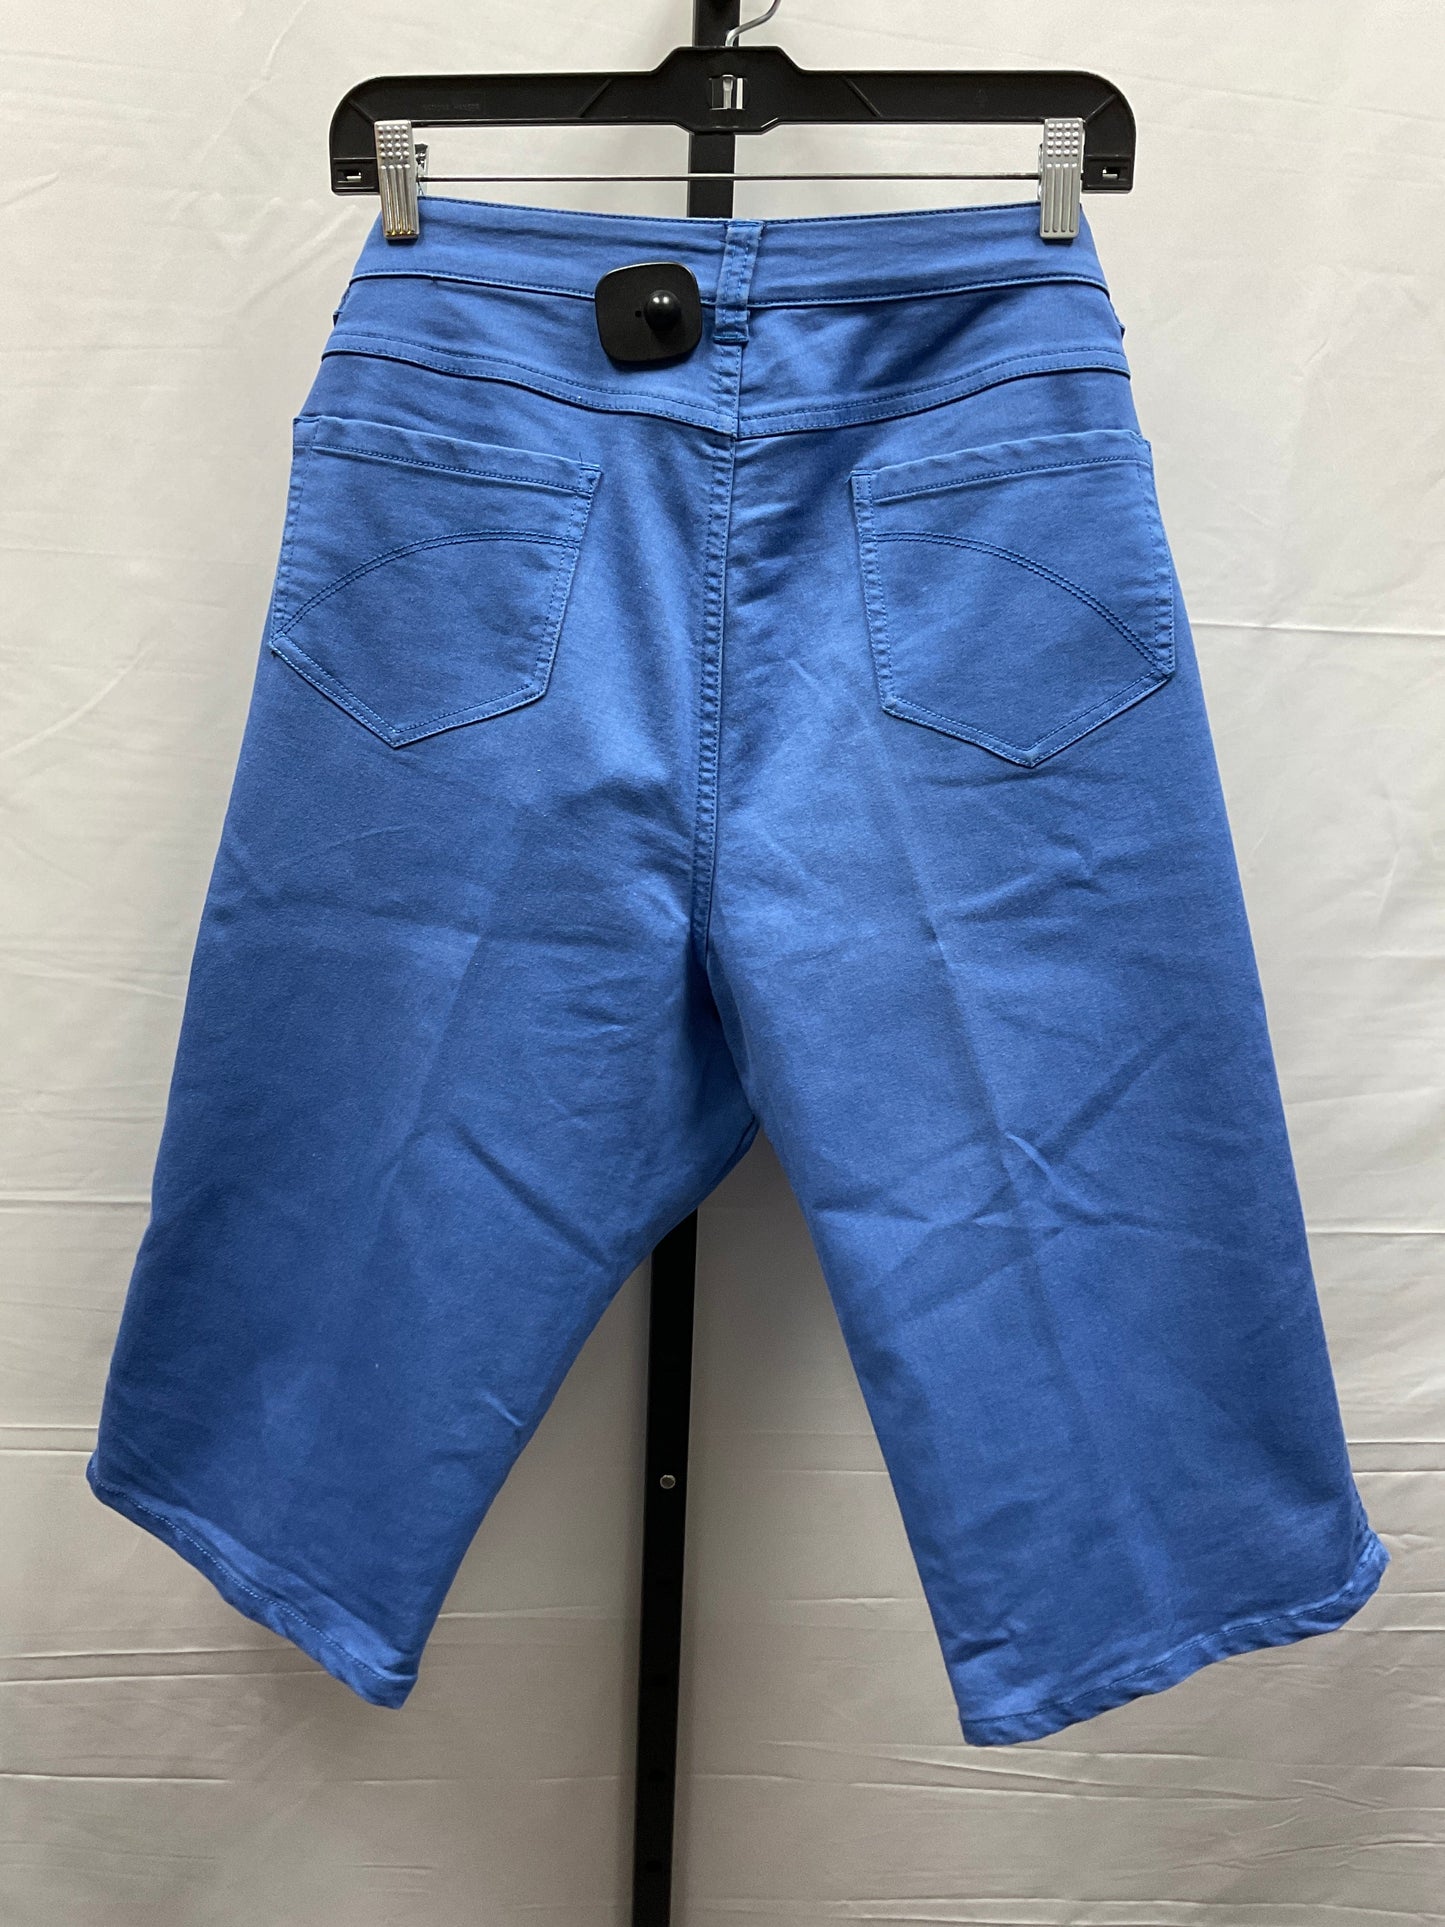 Blue Shorts Christopher And Banks, Size 16